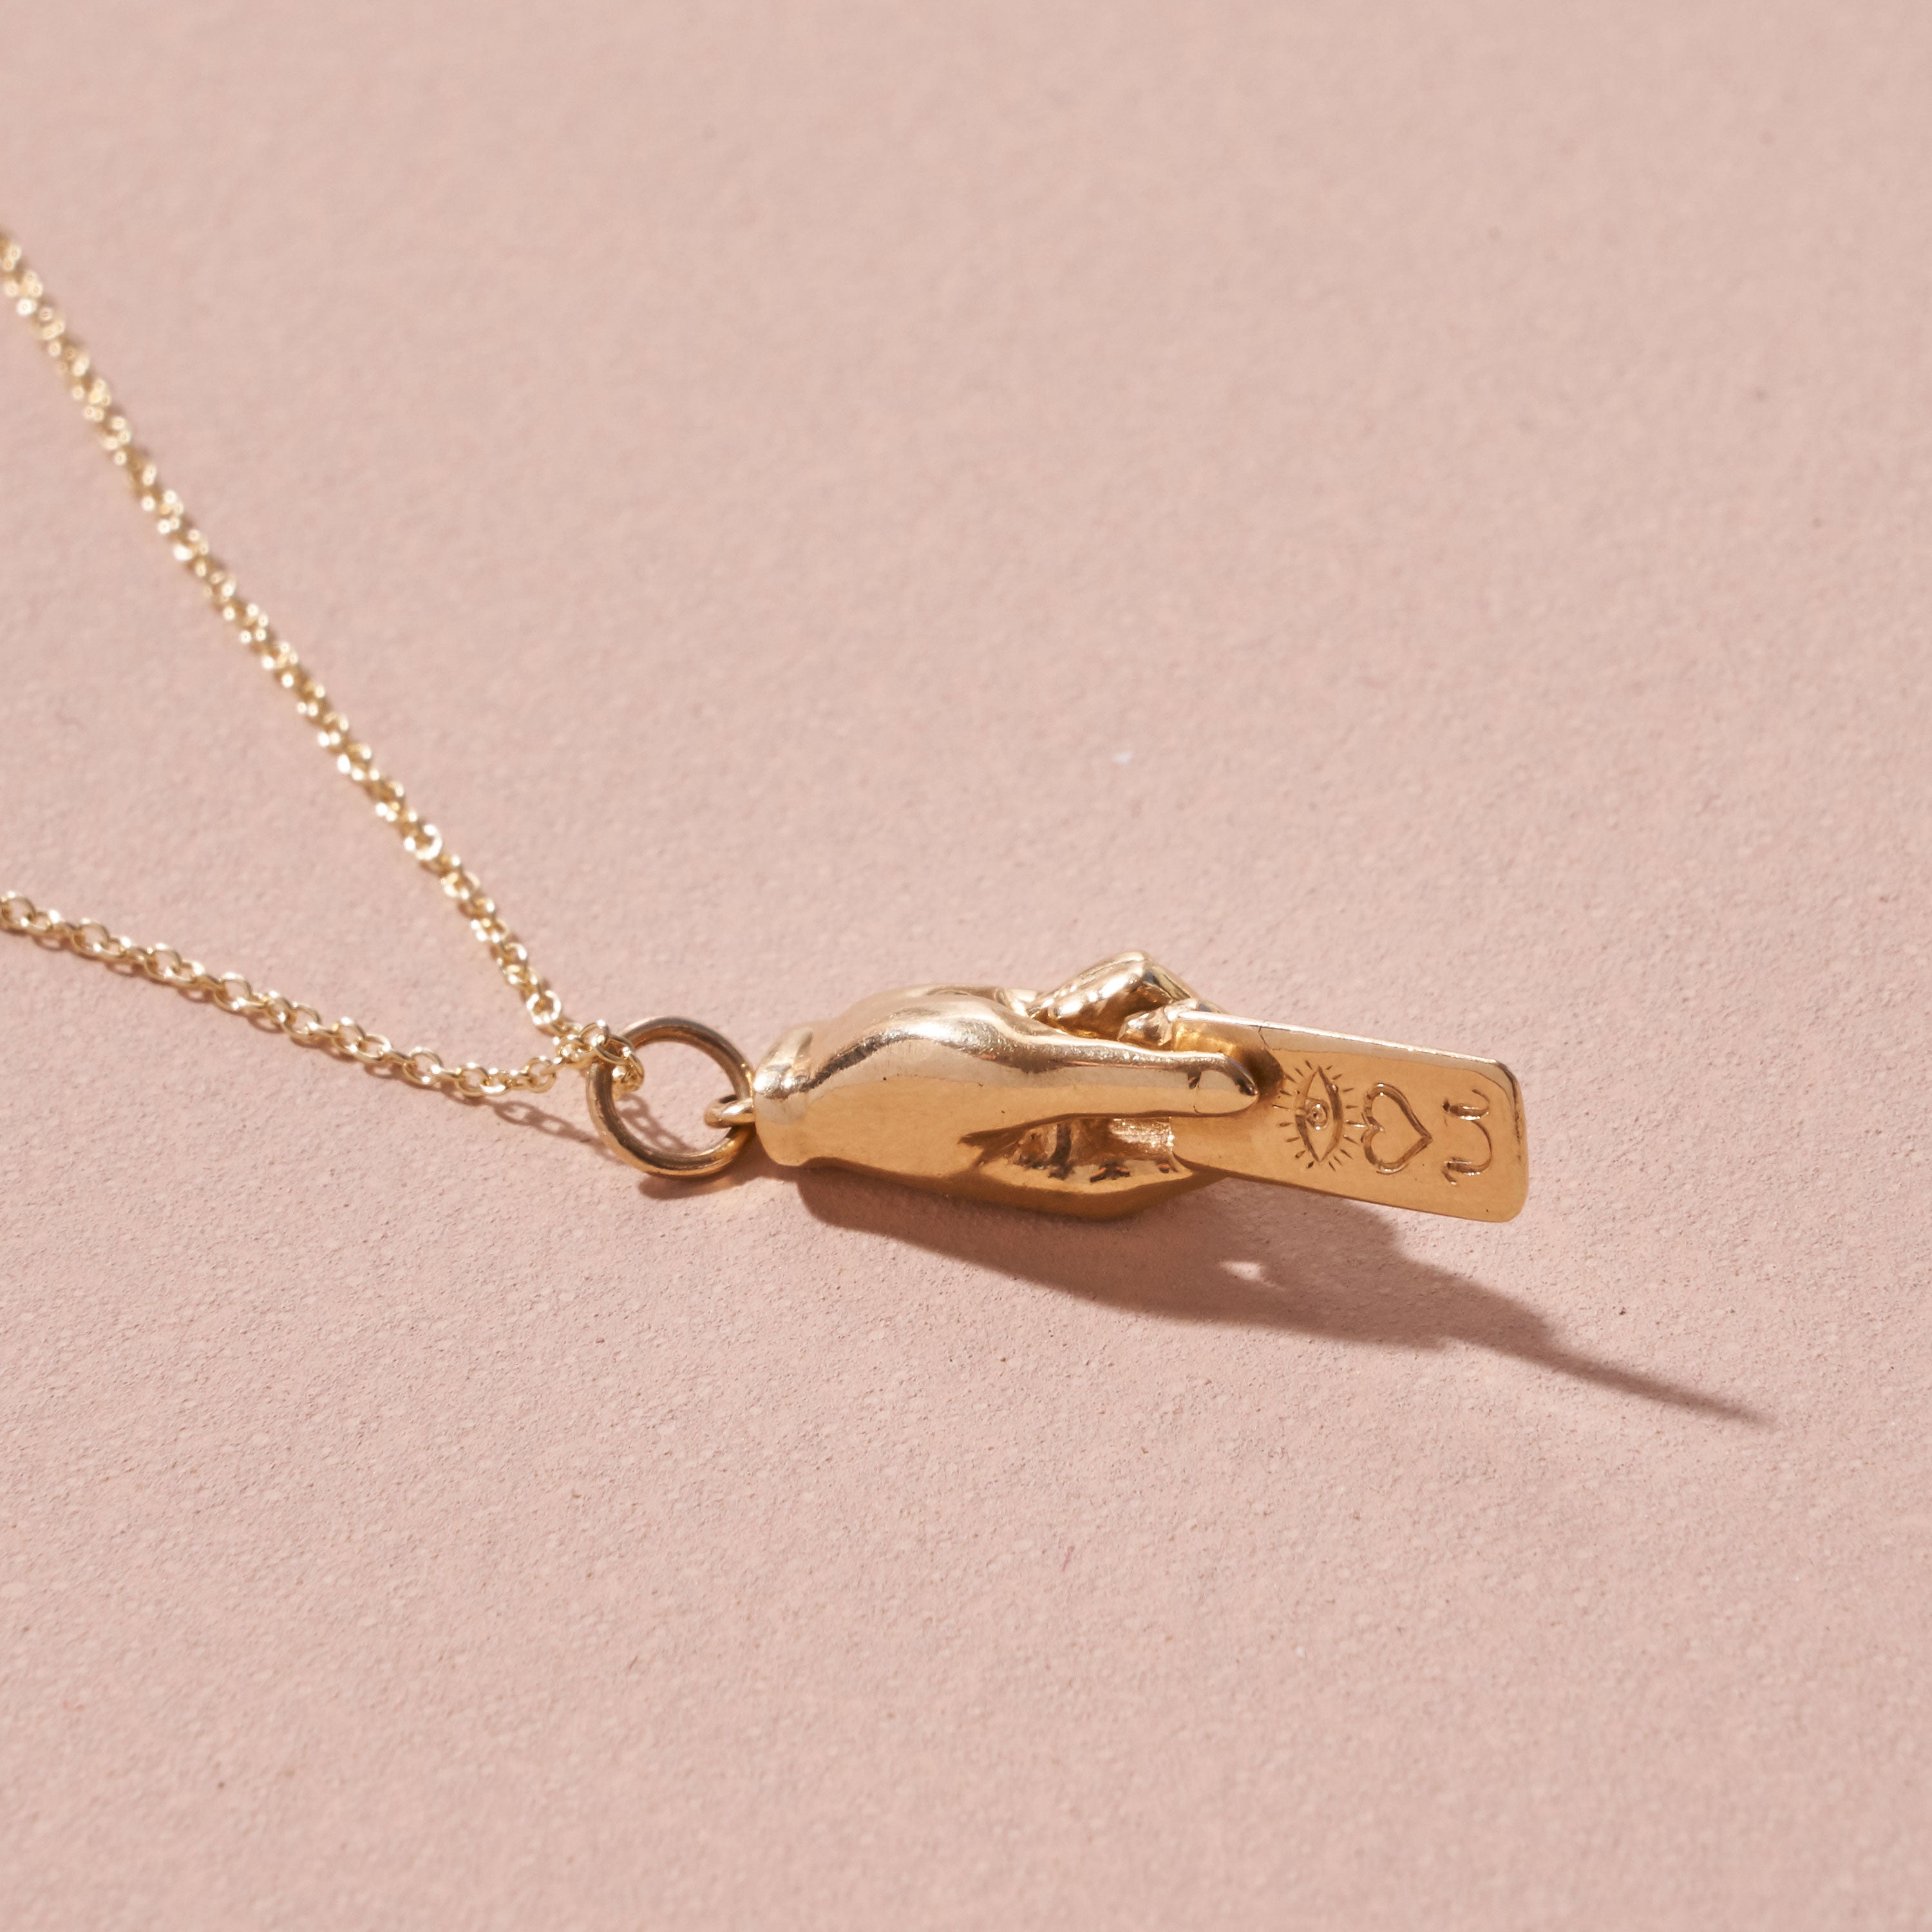 The F&B Love Letter Hand Charm